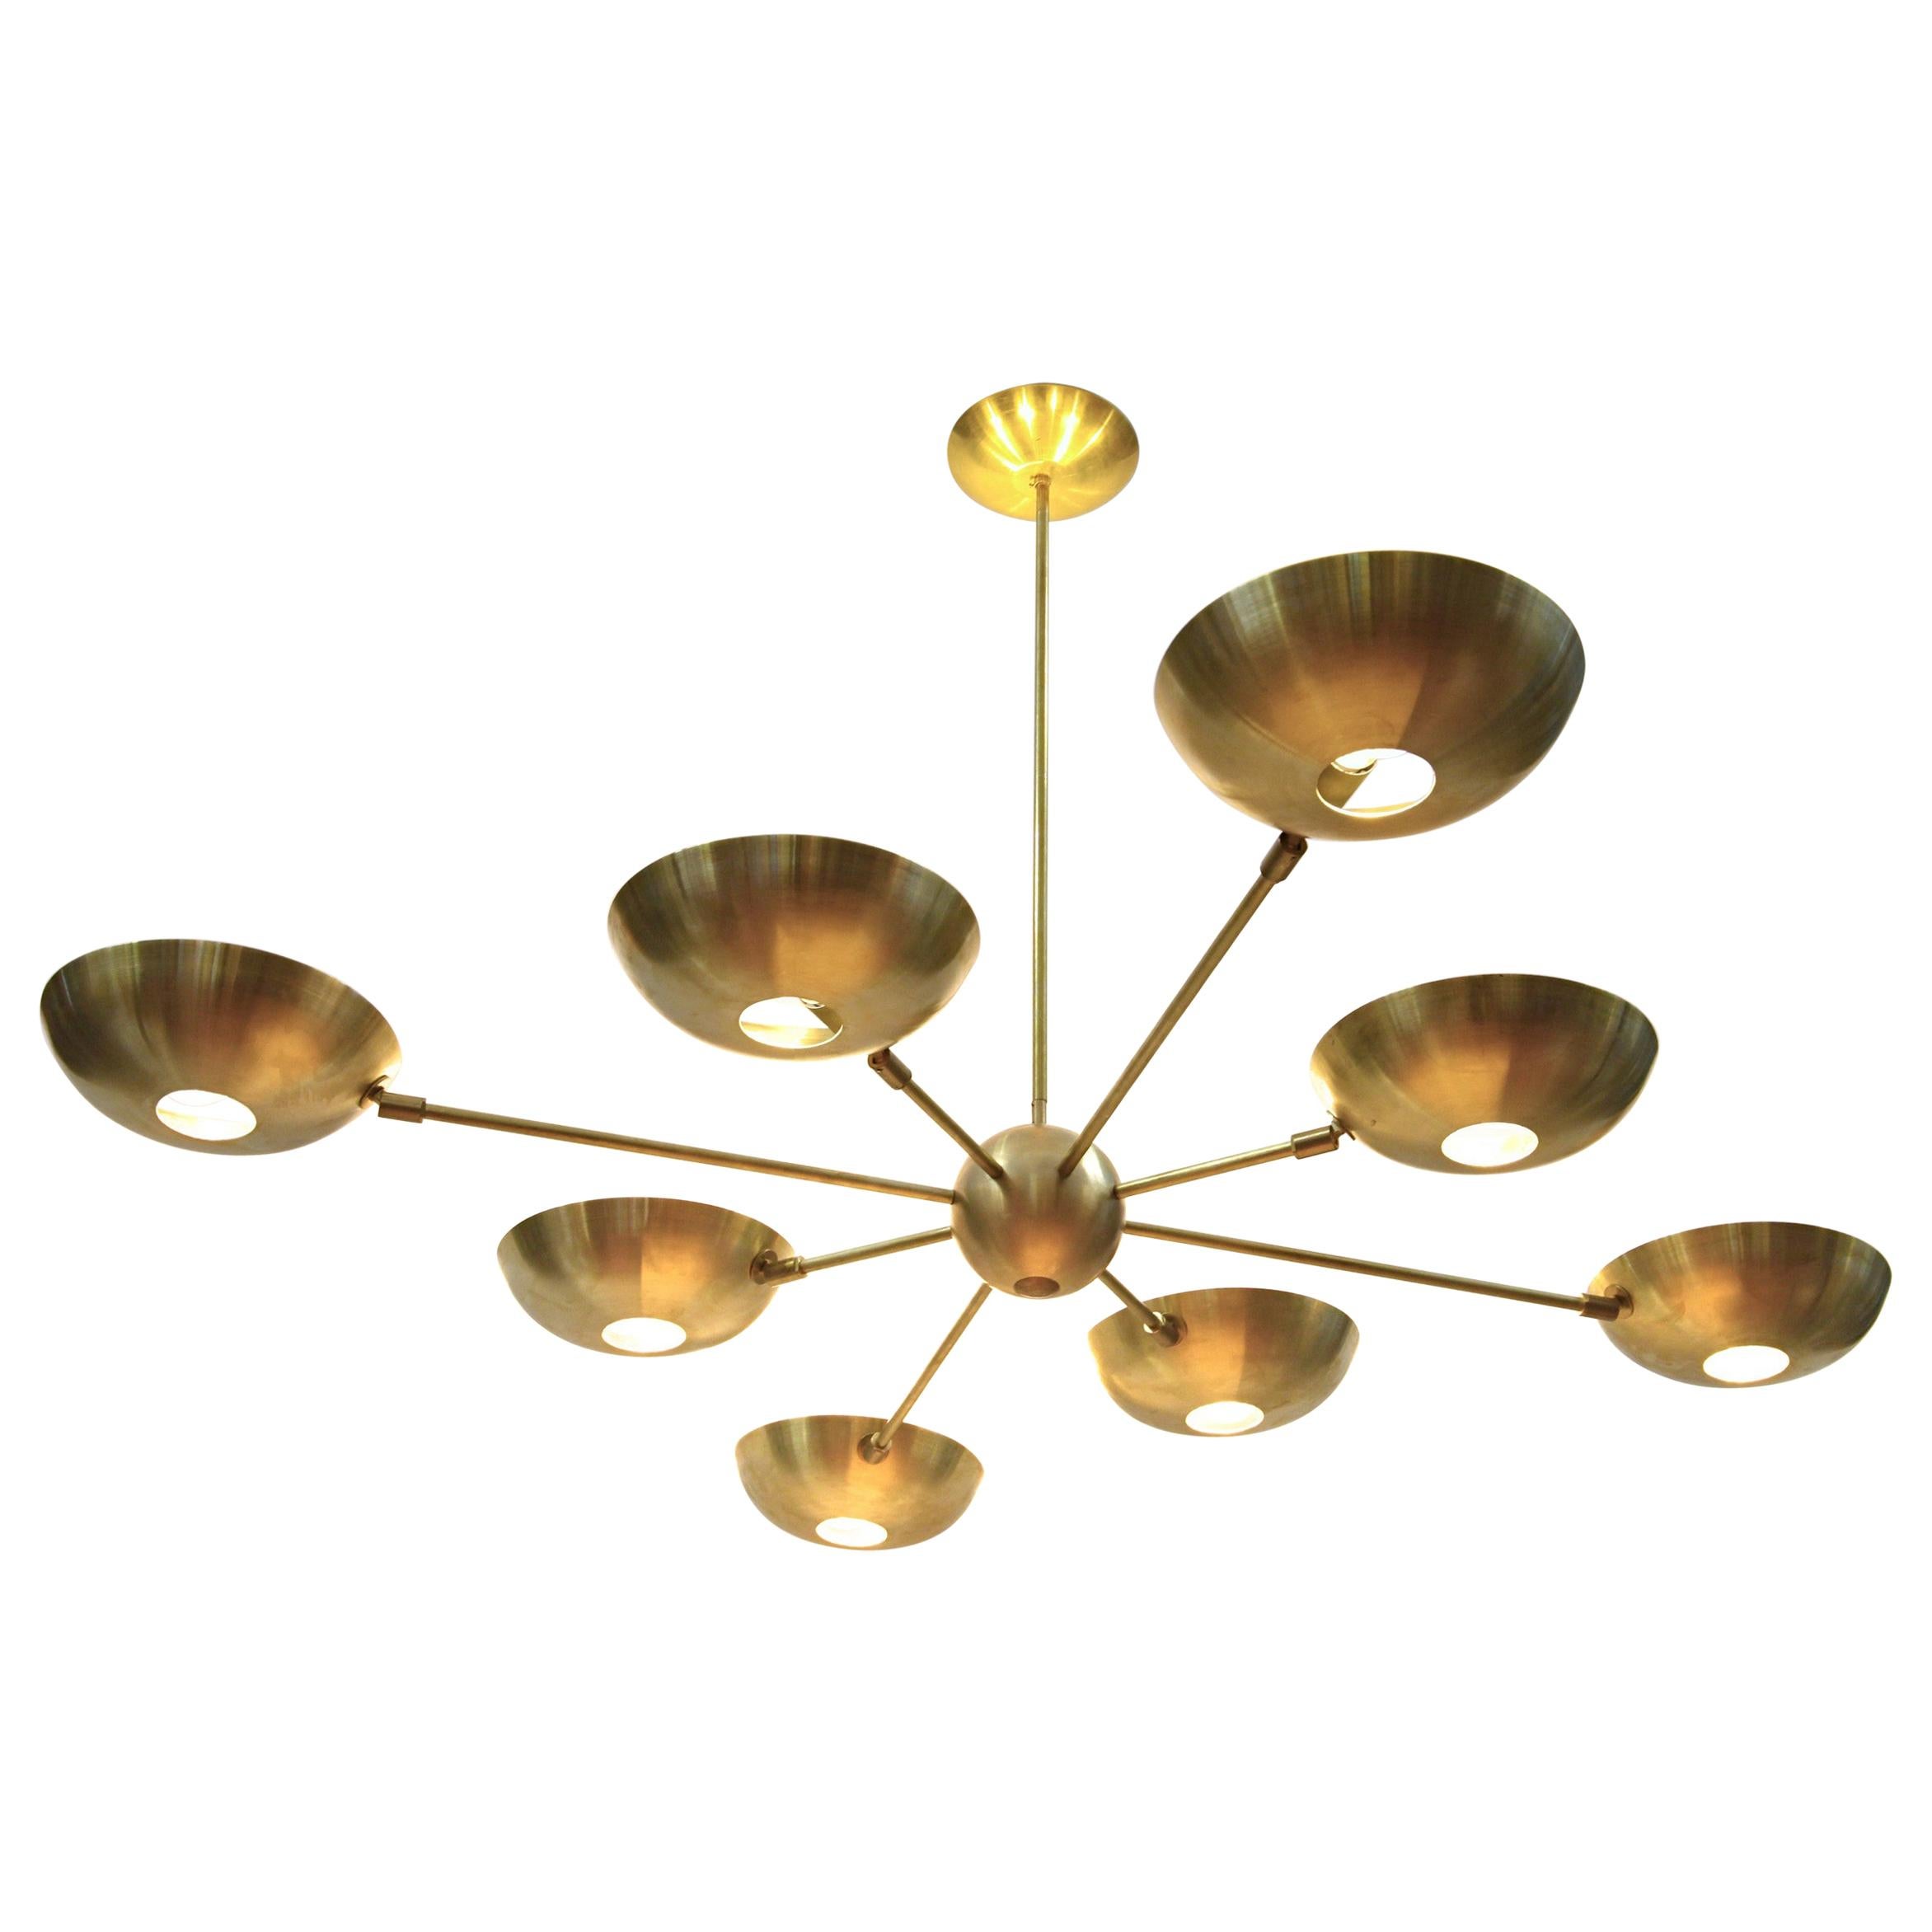 This unique chandelier is inspired by the solar system, with each arm representing a planet, and the central sphere symbolizing the sun. It has a diameter of 60 in. (152 cm).
The chandelier is versatile enough to accommodate low ceilings, as its